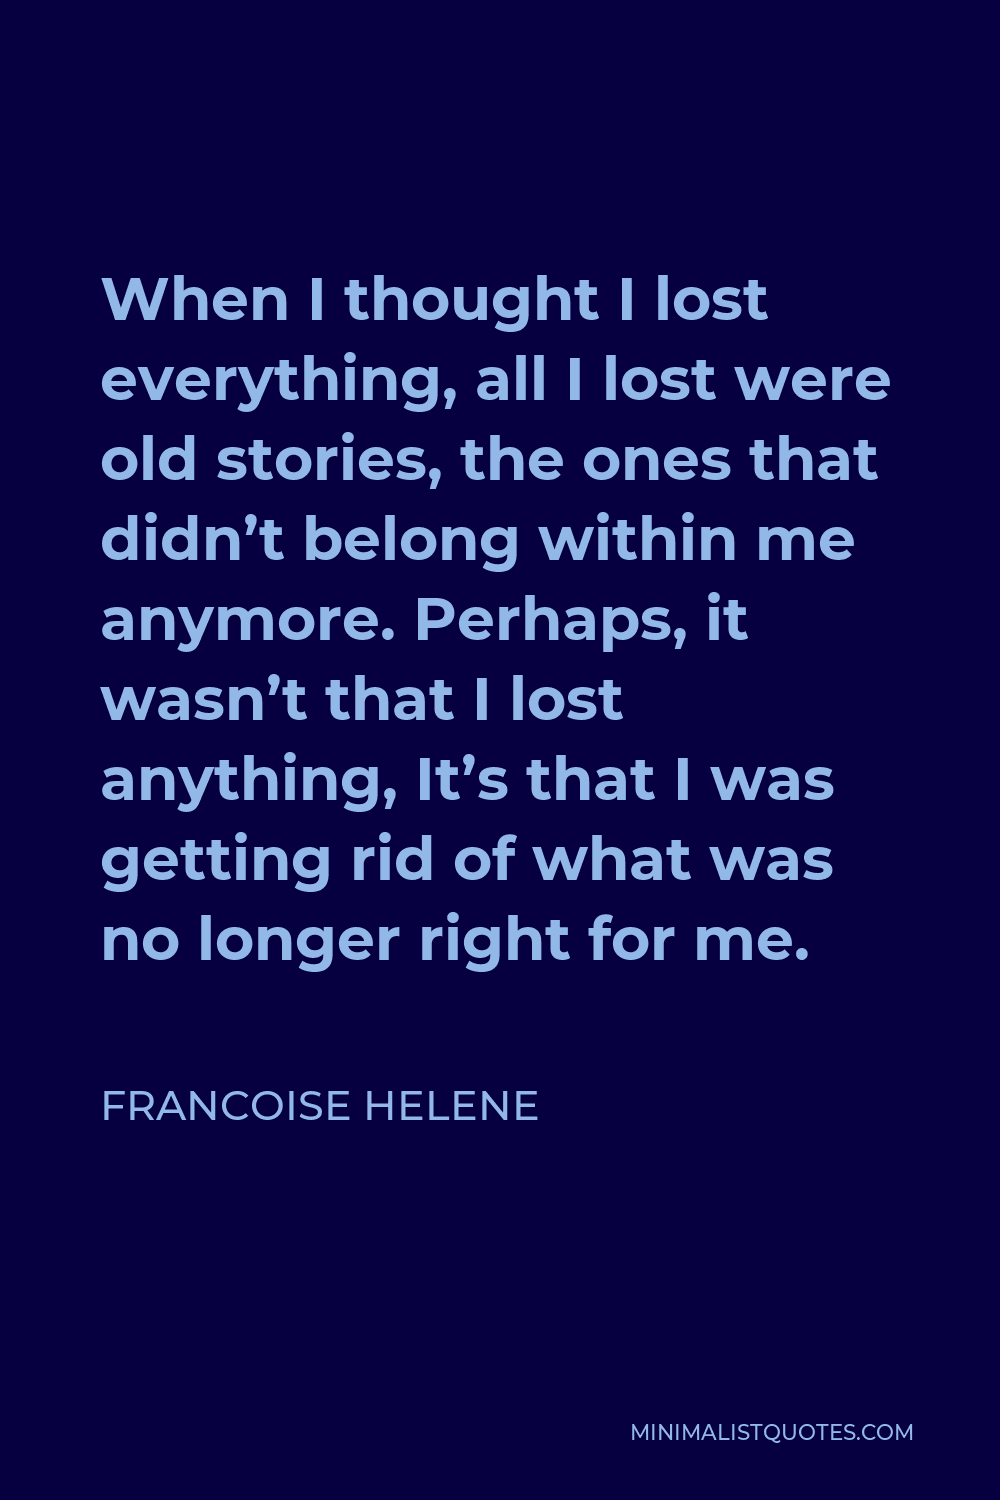 Francoise Helene Quote - When I thought I lost everything, all I lost were old stories, the ones that didn’t belong within me anymore. Perhaps, it wasn’t that I lost anything, It’s that I was getting rid of what was no longer right for me.